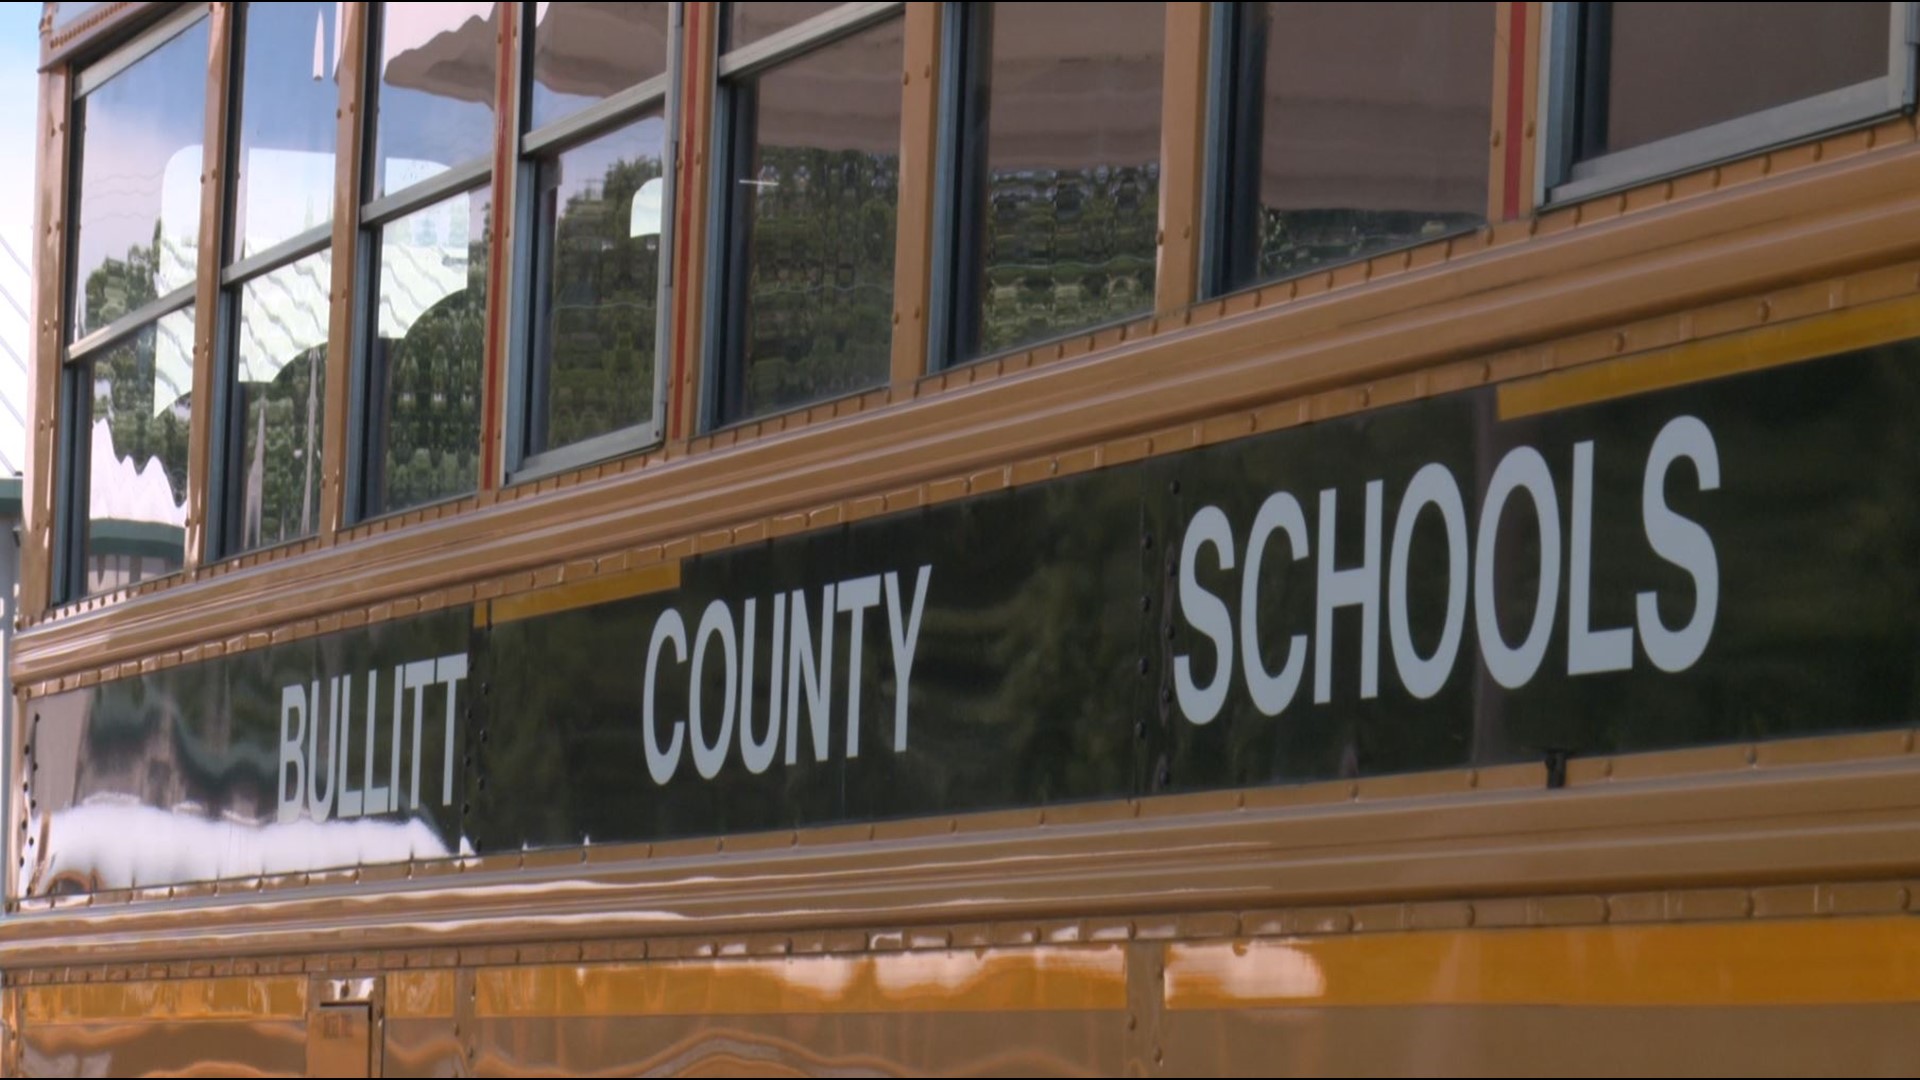 Bussing has been one of the bigger problems for Bullitt county heading into the 2022-2023 school year, and leaders remain both transparent and optimistic.